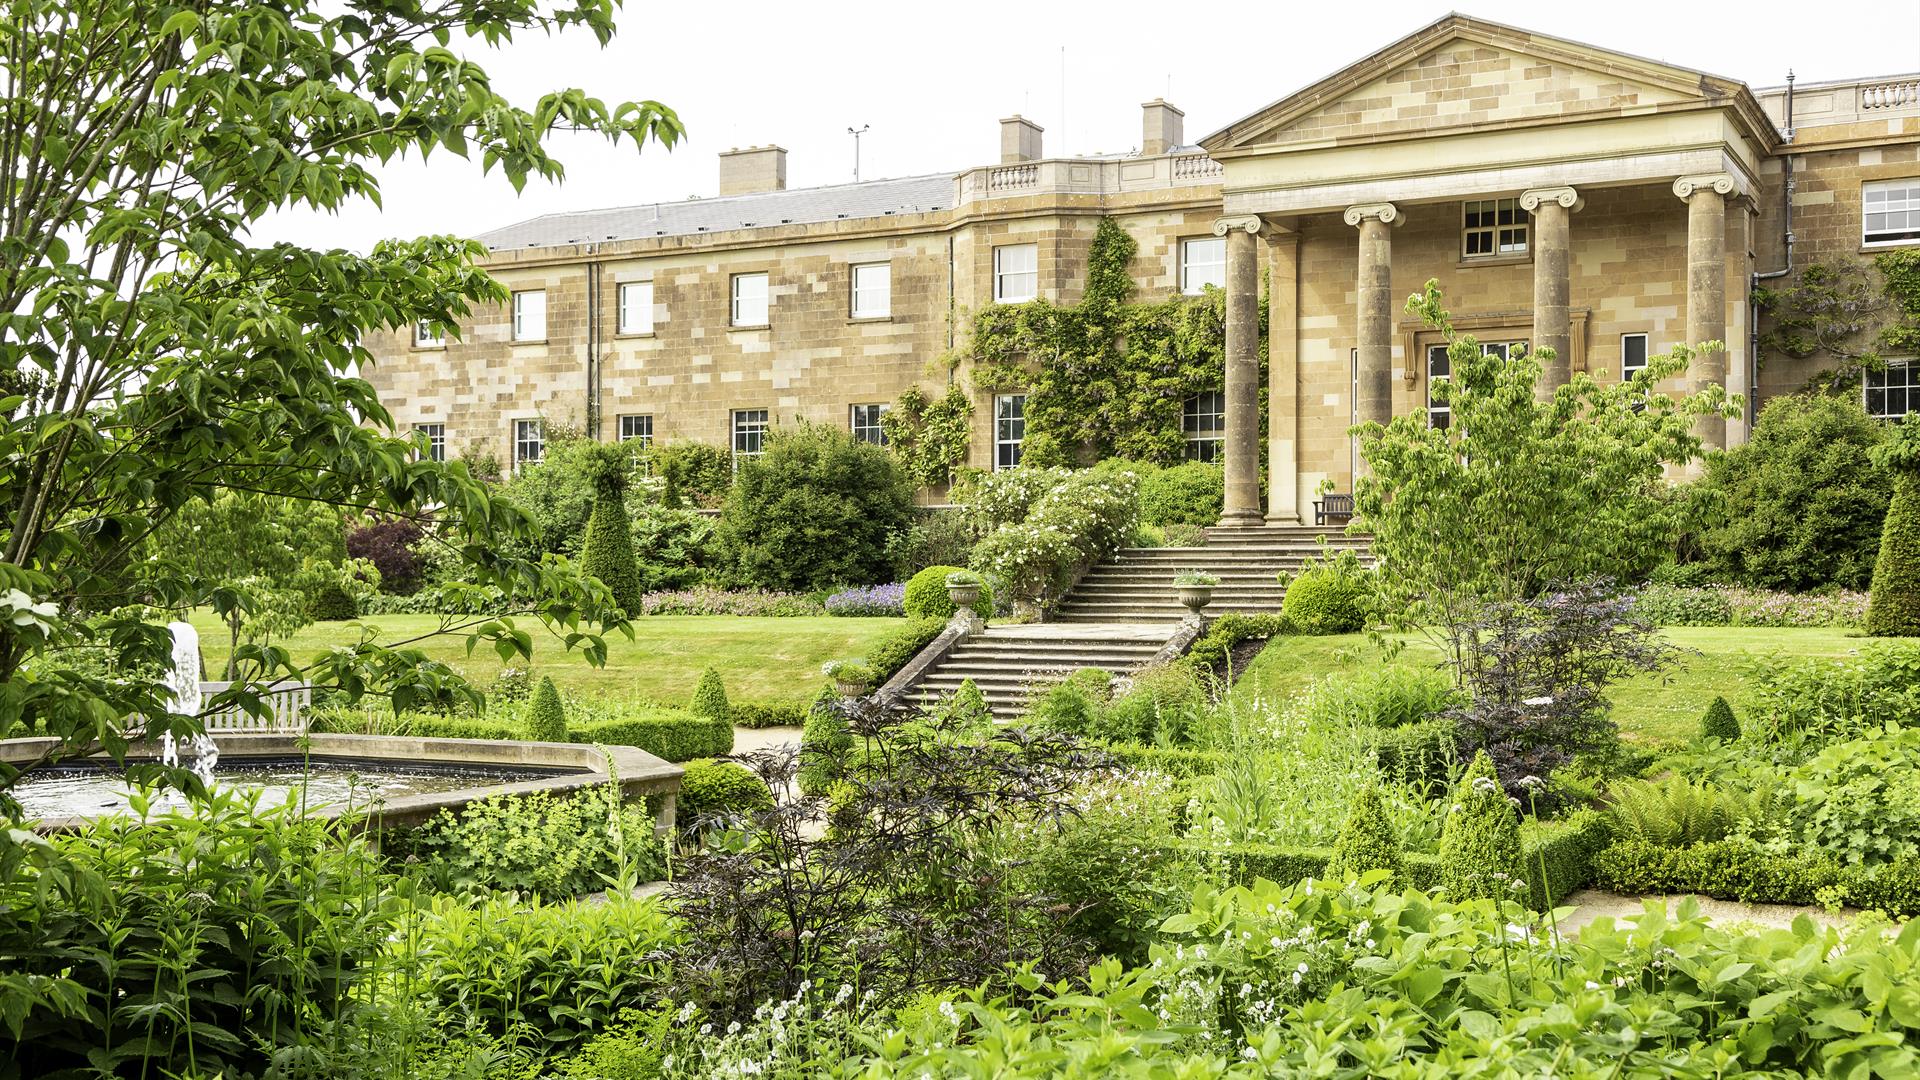 Gardens of Hillsborough Castle with the castle in the background